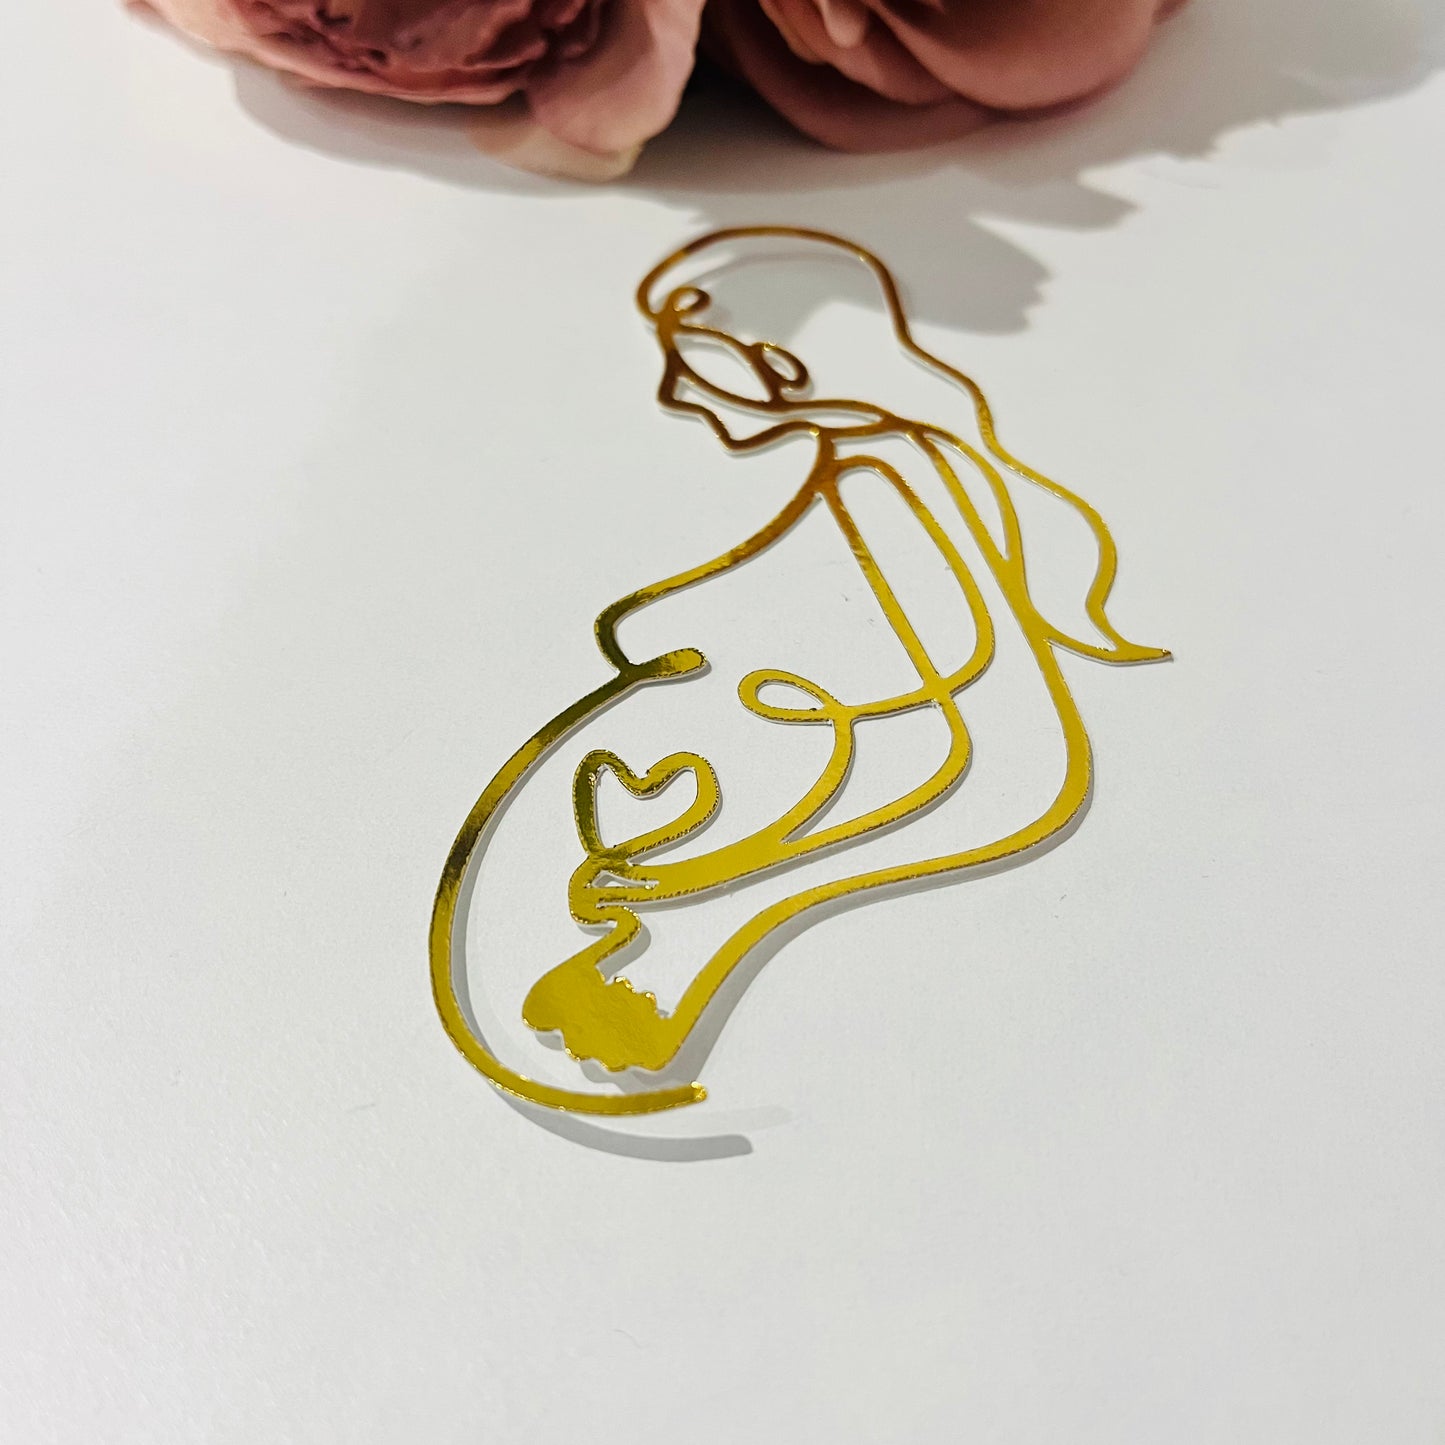 Line Art Pregnant Lady Silhouette Cardstock Cake Charm